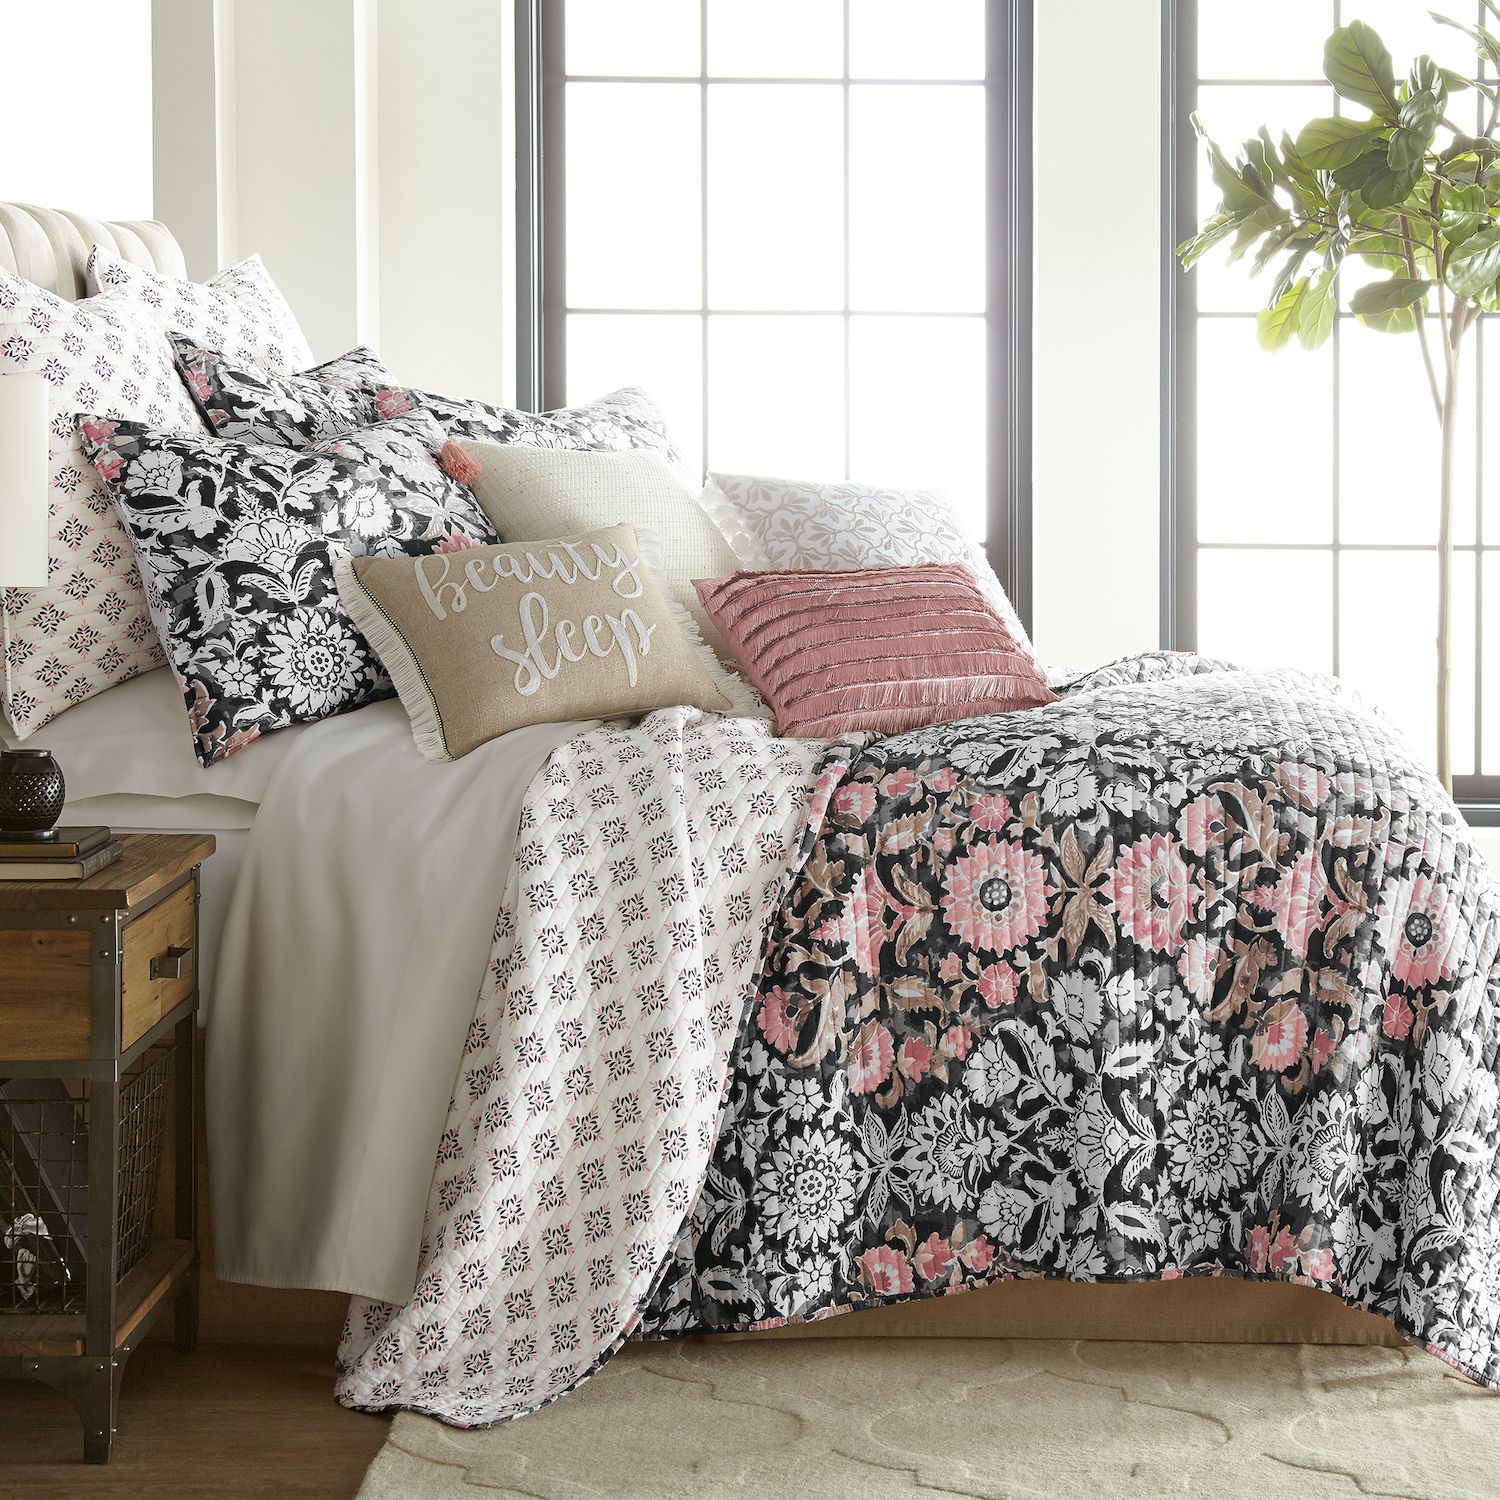 Image for Levtex Home Loretta Quilt Set with Shams at Kohl's.